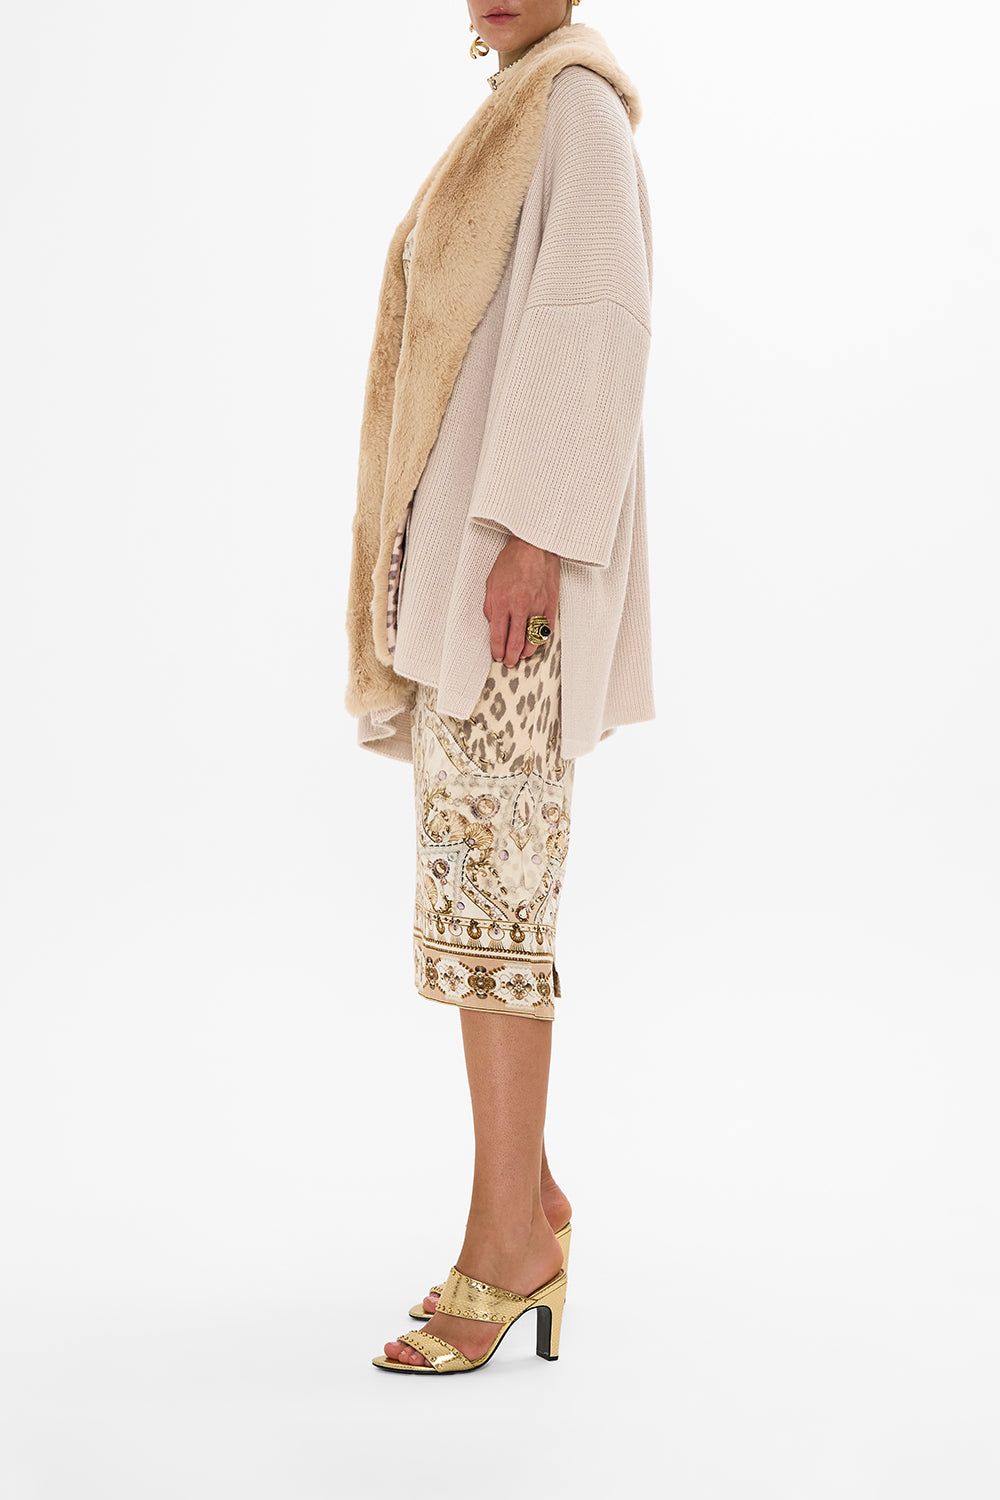 CAMILLA blush knit relaxed layer with faux fur in Grotto Goddess print.